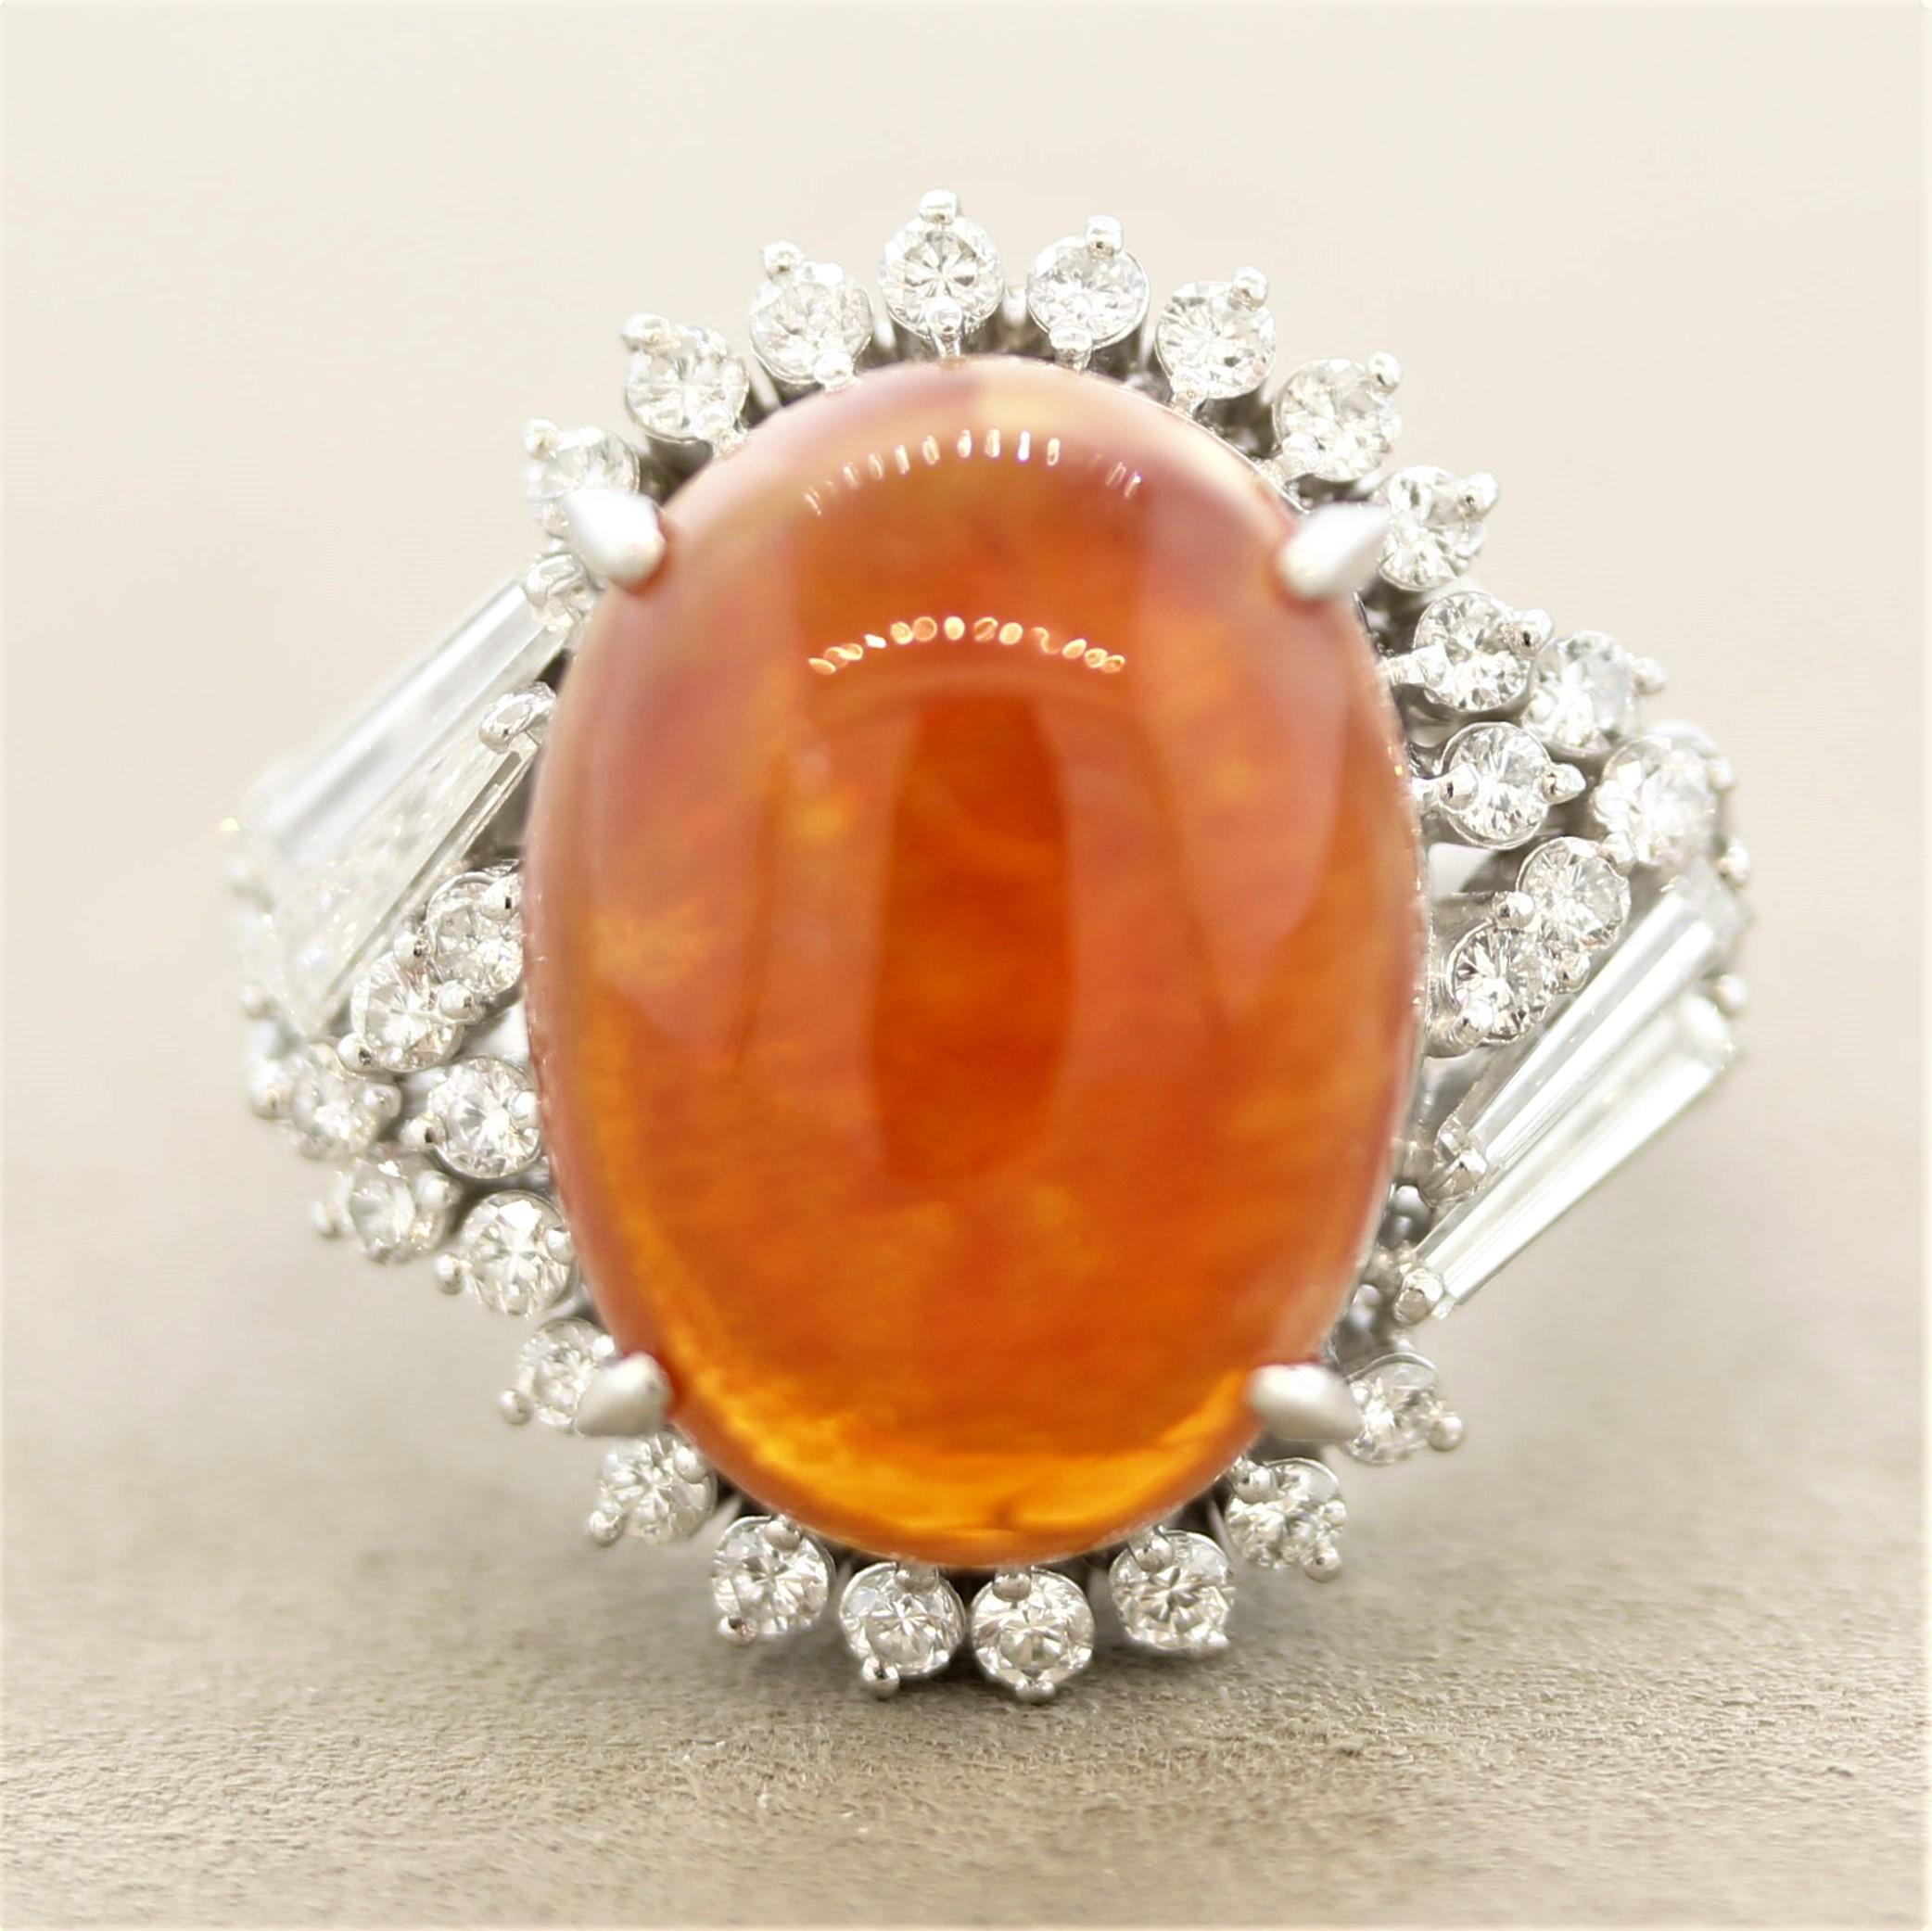 A special ring featuring a gem-quality rich orangey-red fire opal weighing 10.92 carats. It has excellent play-of-color as strong flashes of green, yellow, orange, and red can all be seen across the stone. It is accented by 1.09 carats of diamonds